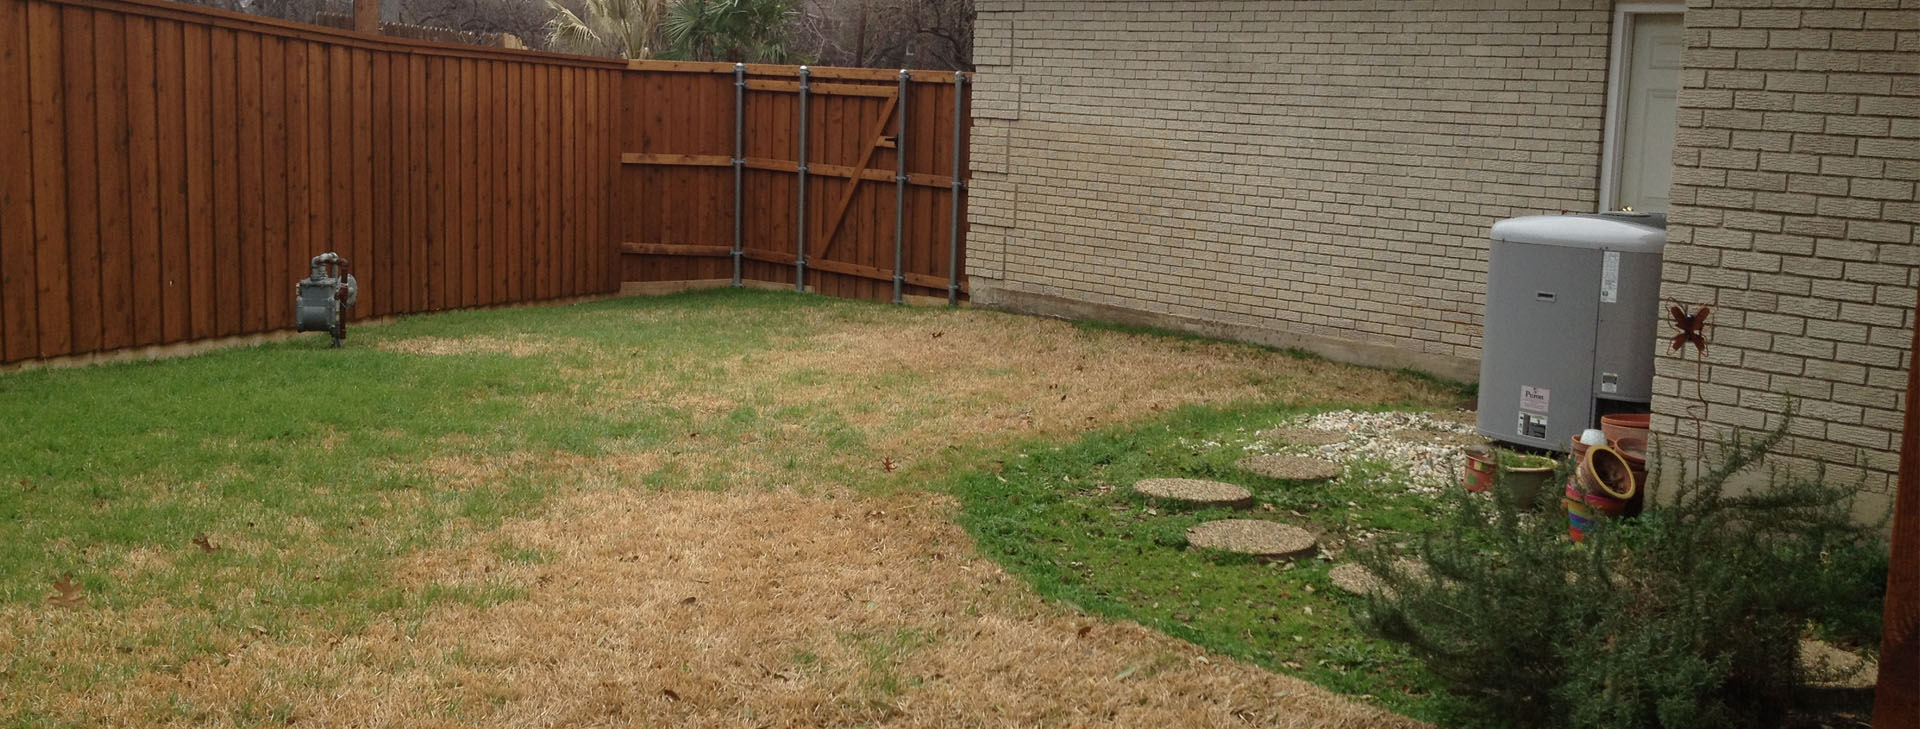 landscape design and installation serving dallas texas and surrounding neighborhoods